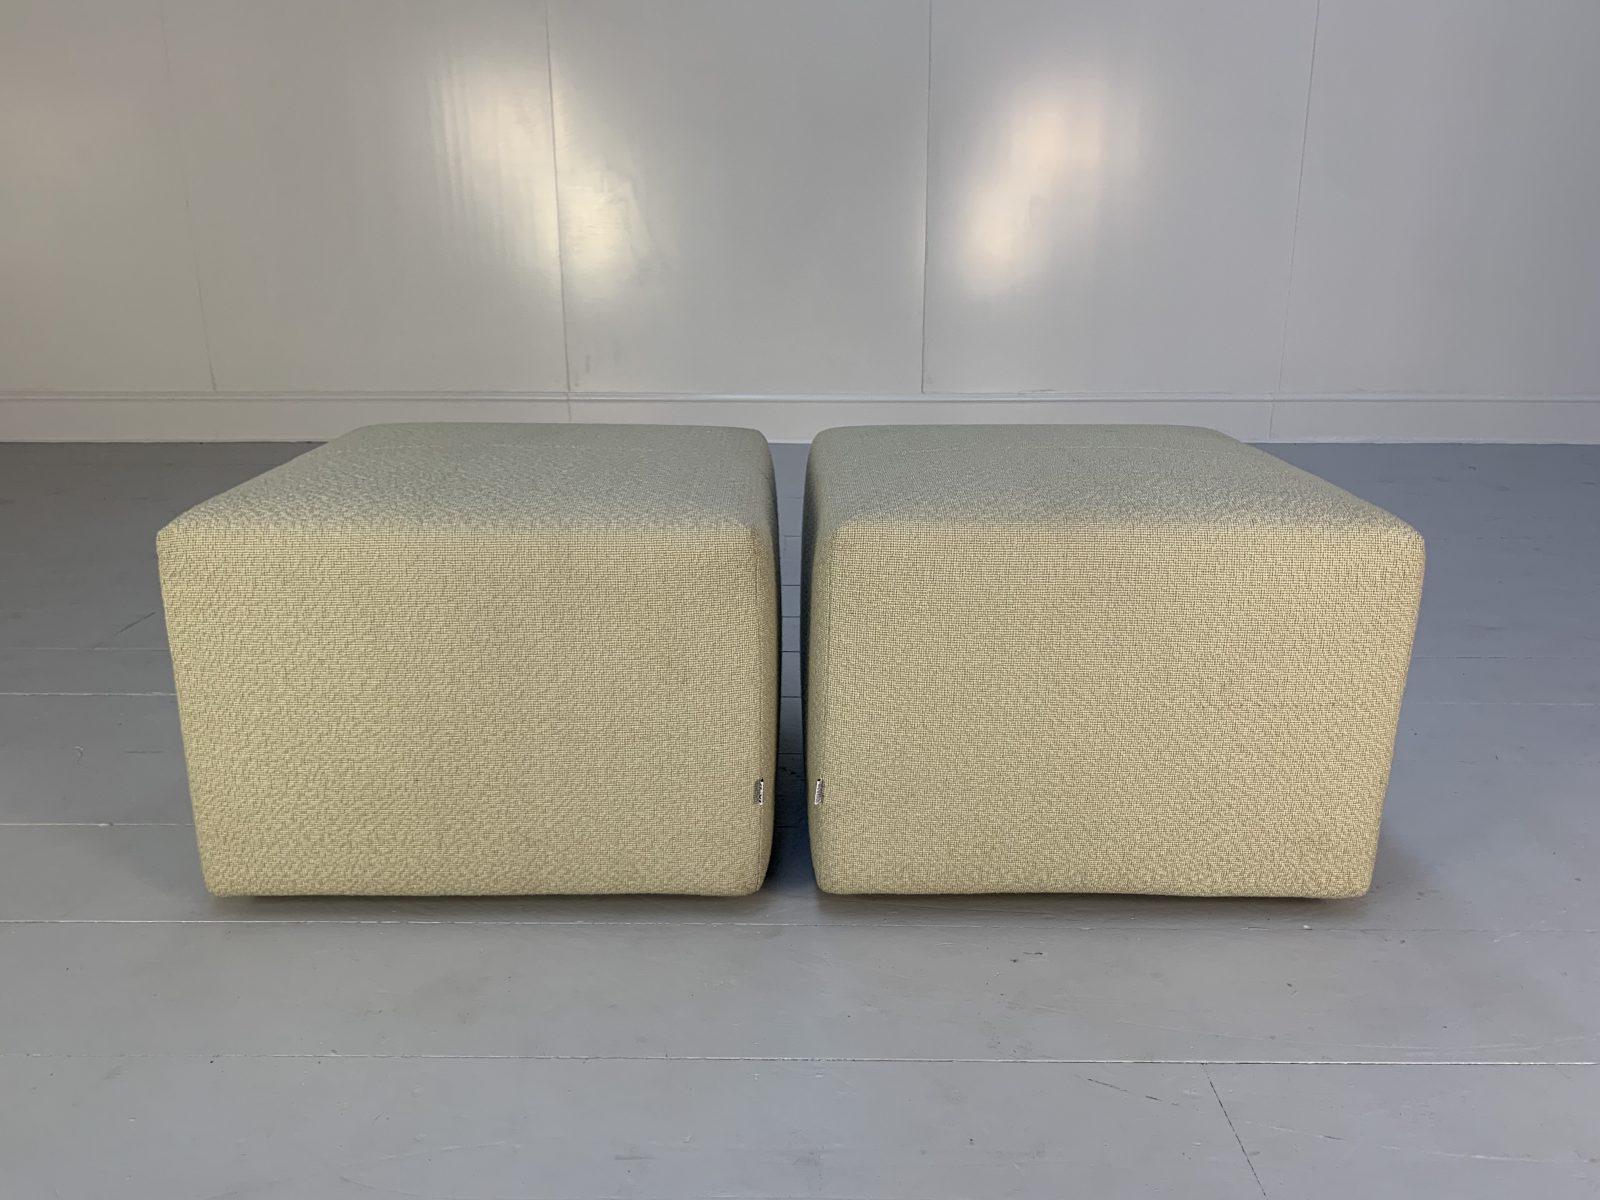 Hello Friends, and welcome to another unmissable offering from Lord Browns Furniture, the UK’s premier resource for fine Sofas and Chairs.

On offer on this occasion is a sublime, immaculately-presented, identical pair of  “Charles” Footstools in